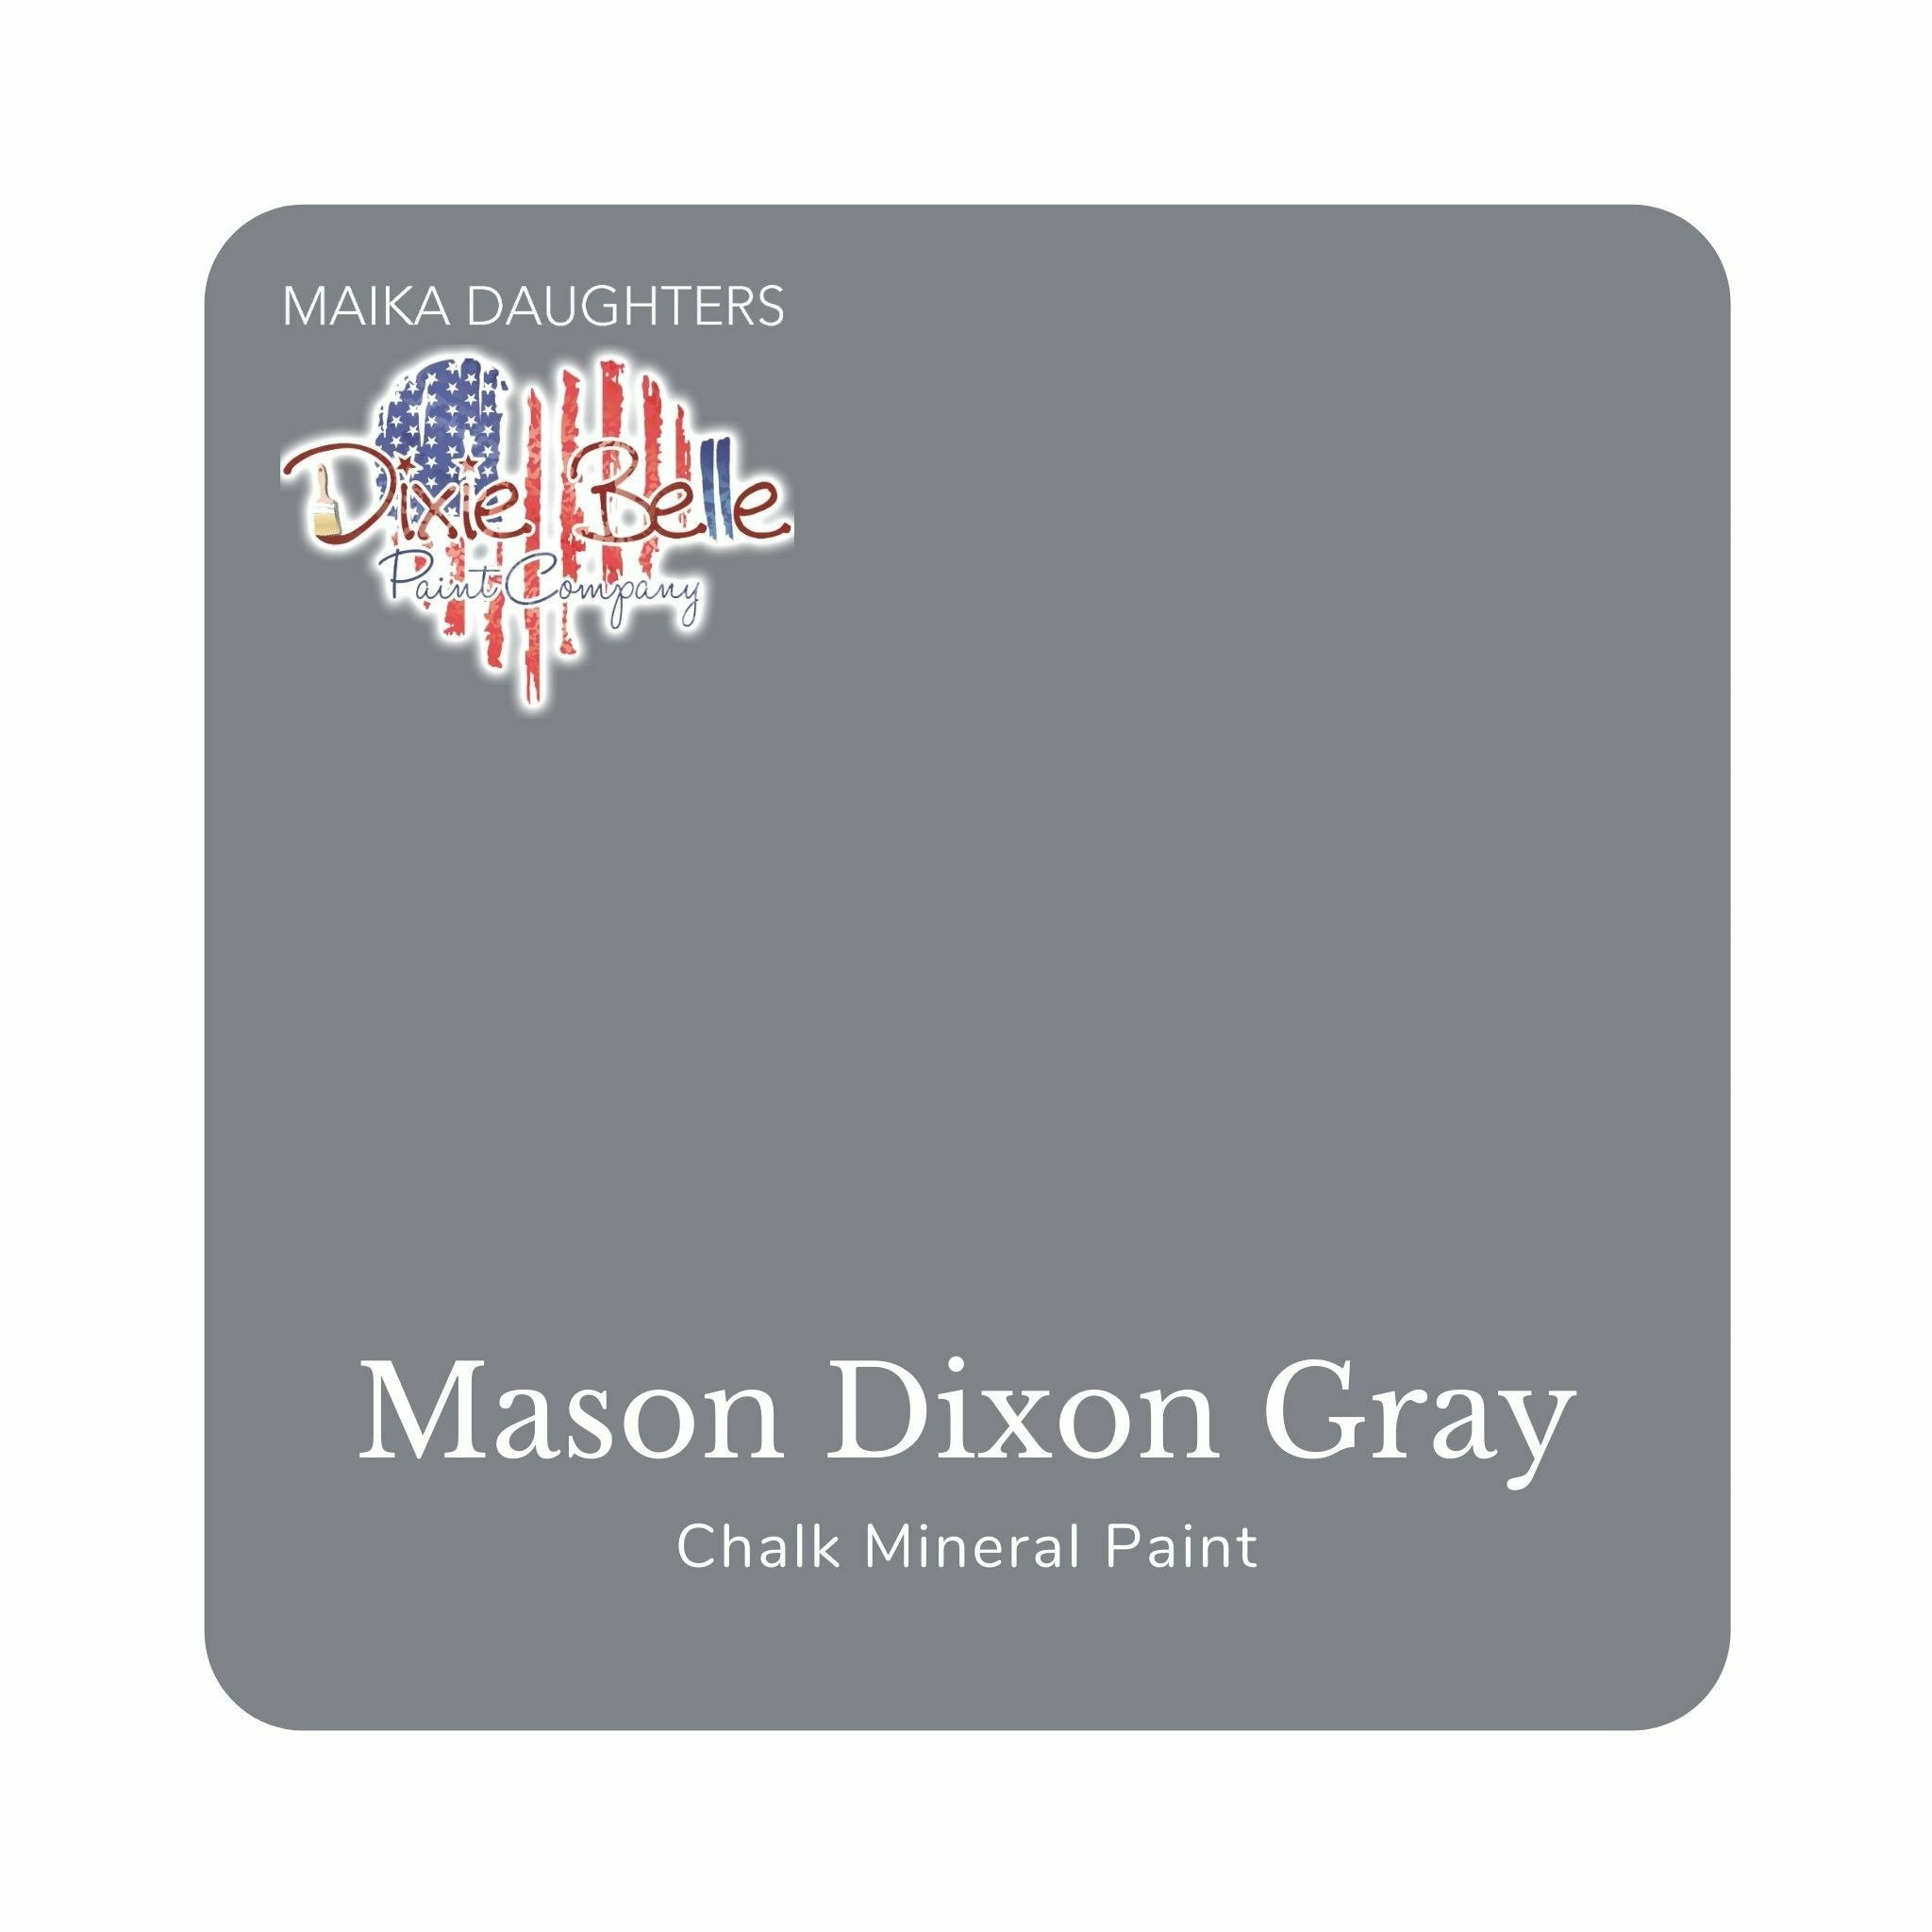 A square swatch card of Dixie Belle Paint Company’s Mason Dixon Chalk Mineral Paint is against a white background. This color is a cool gray with lavender undertones.